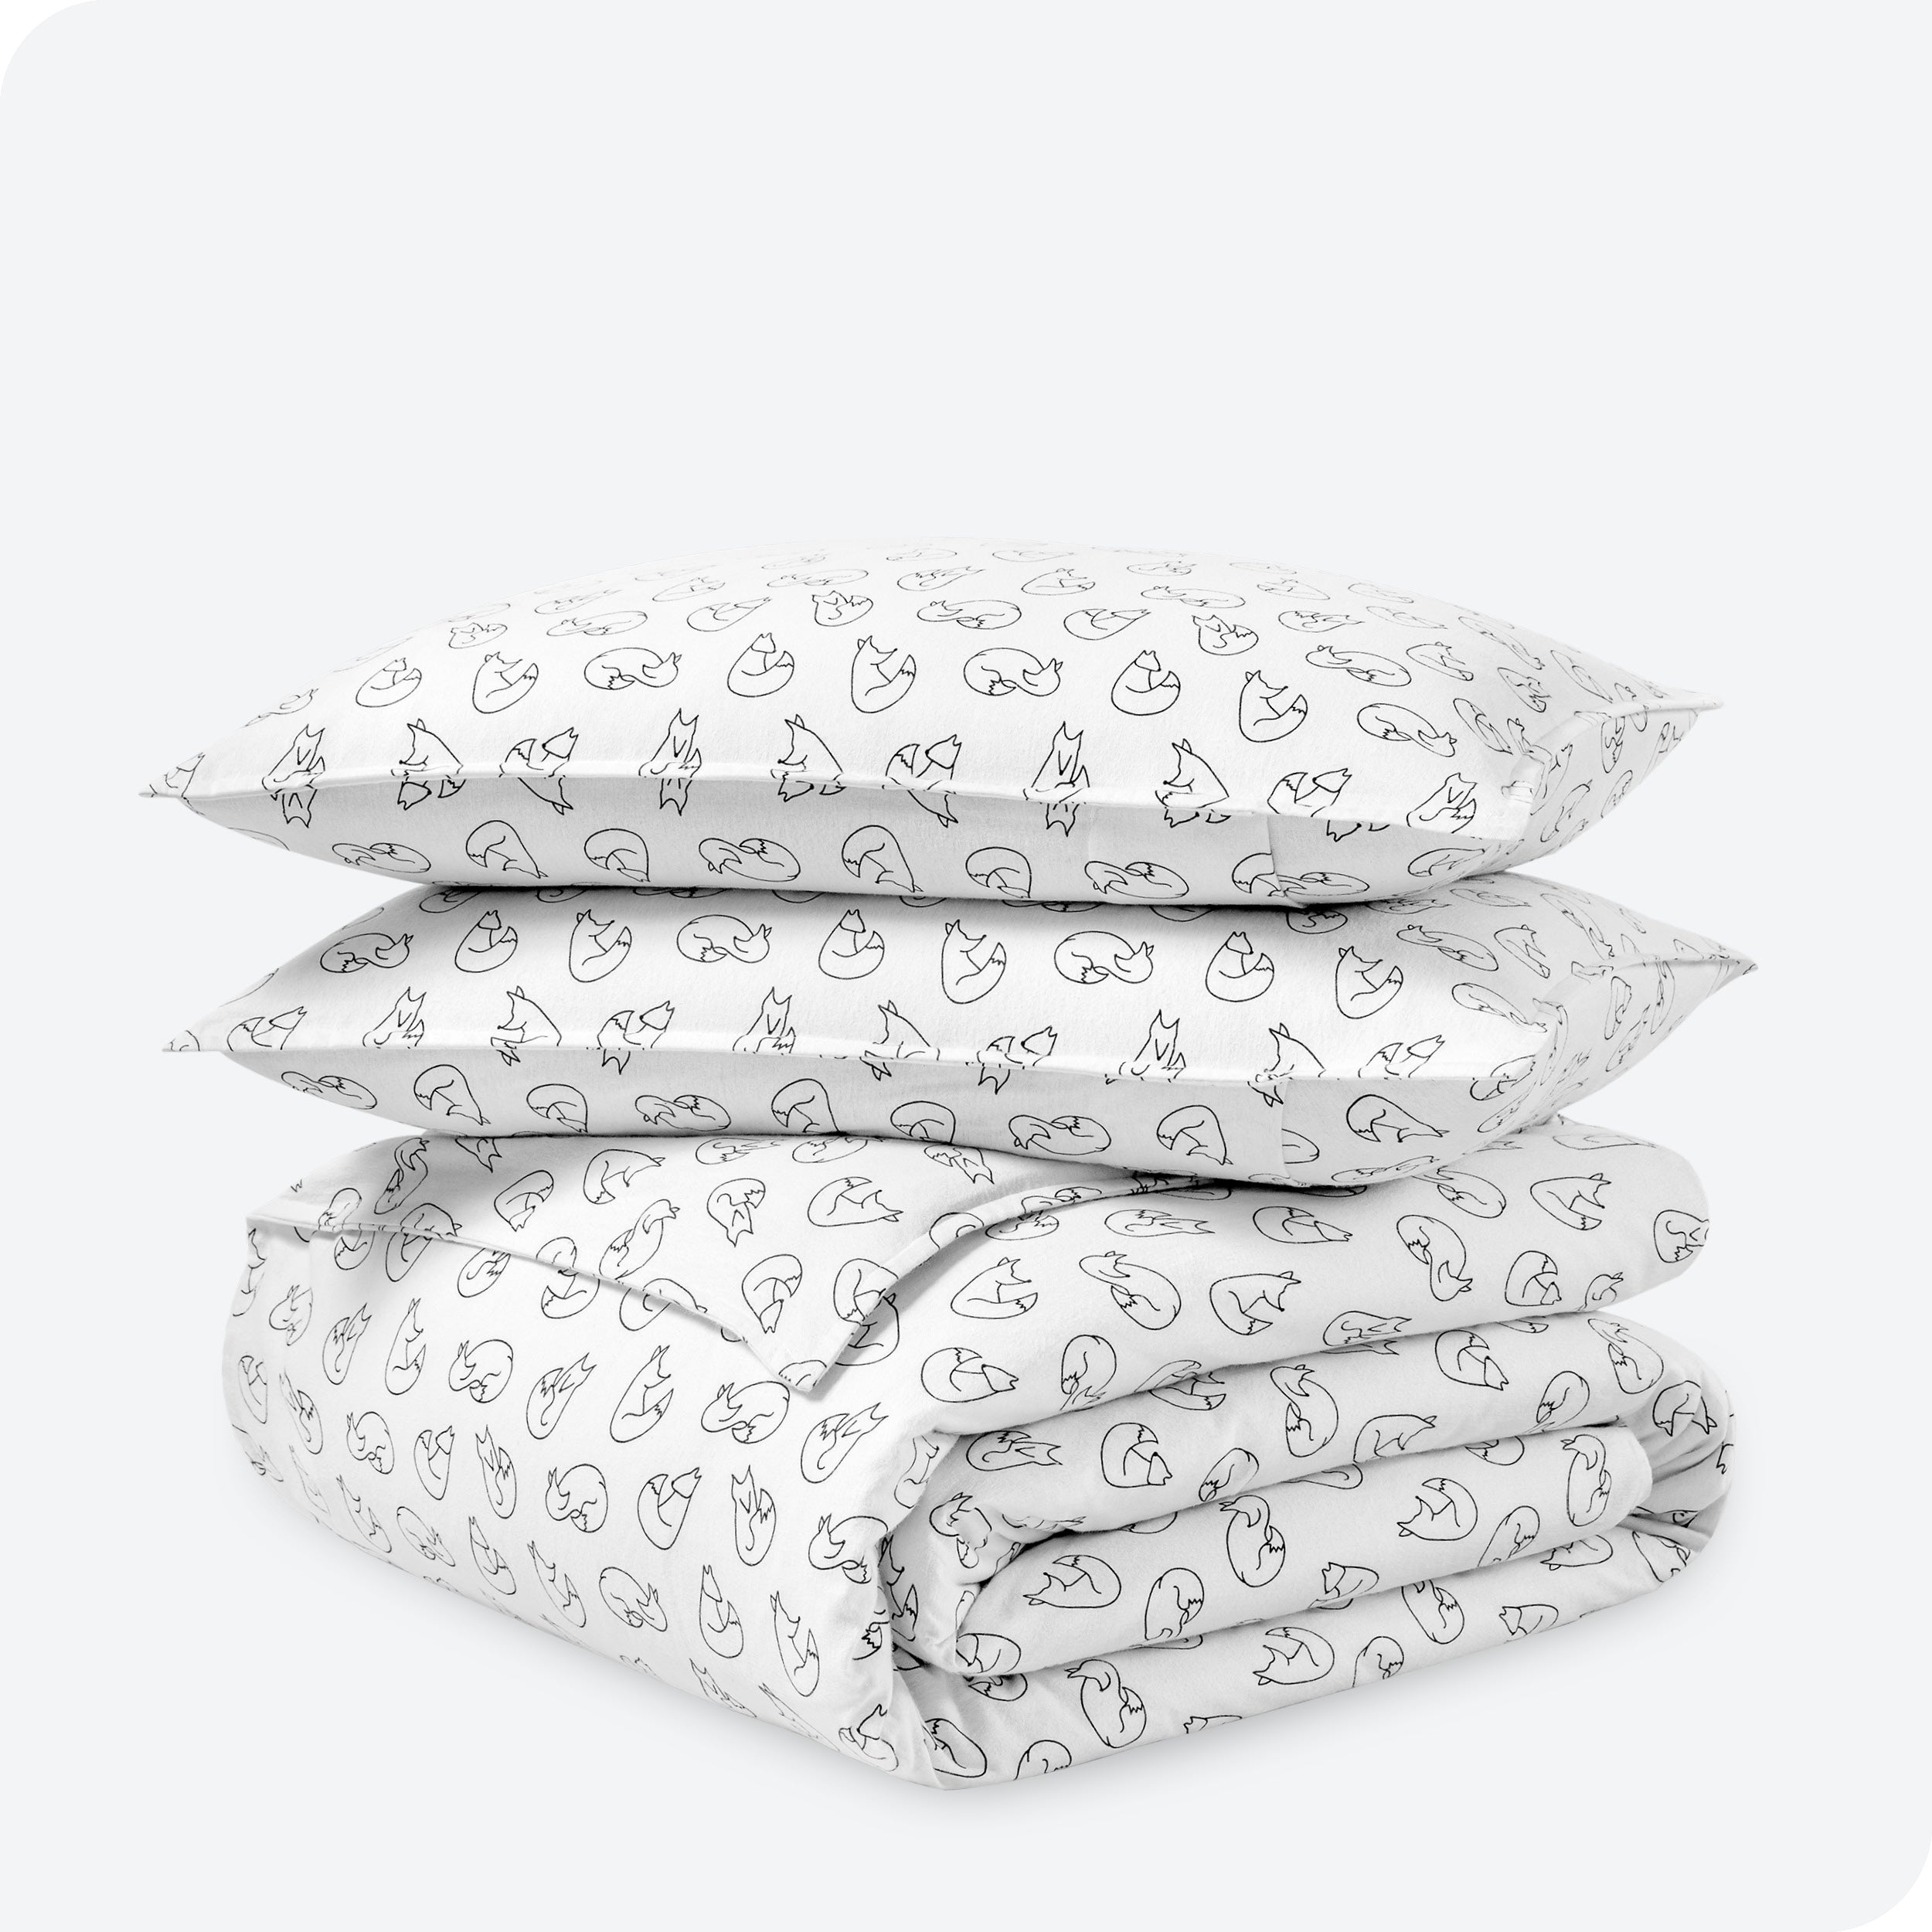 Fox print duvet cover and sham set folded and stacked